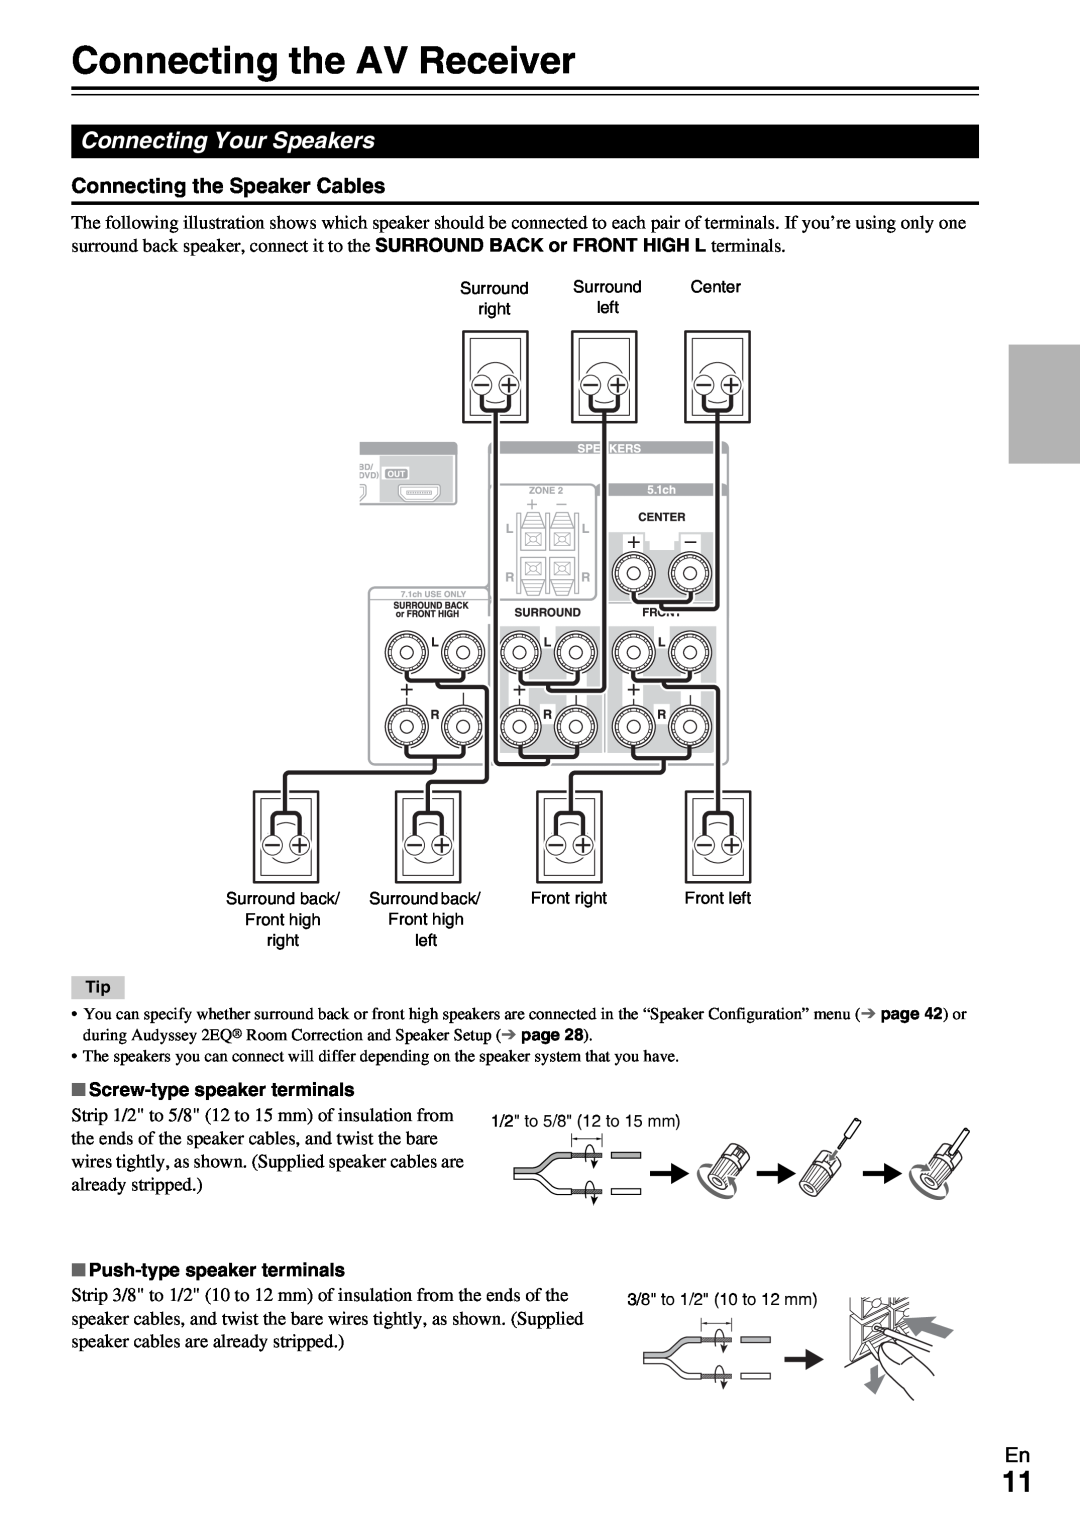 Onkyo HT-R690 instruction manual Connecting the AV Receiver, Connecting Your Speakers, Screw-typespeaker terminals 